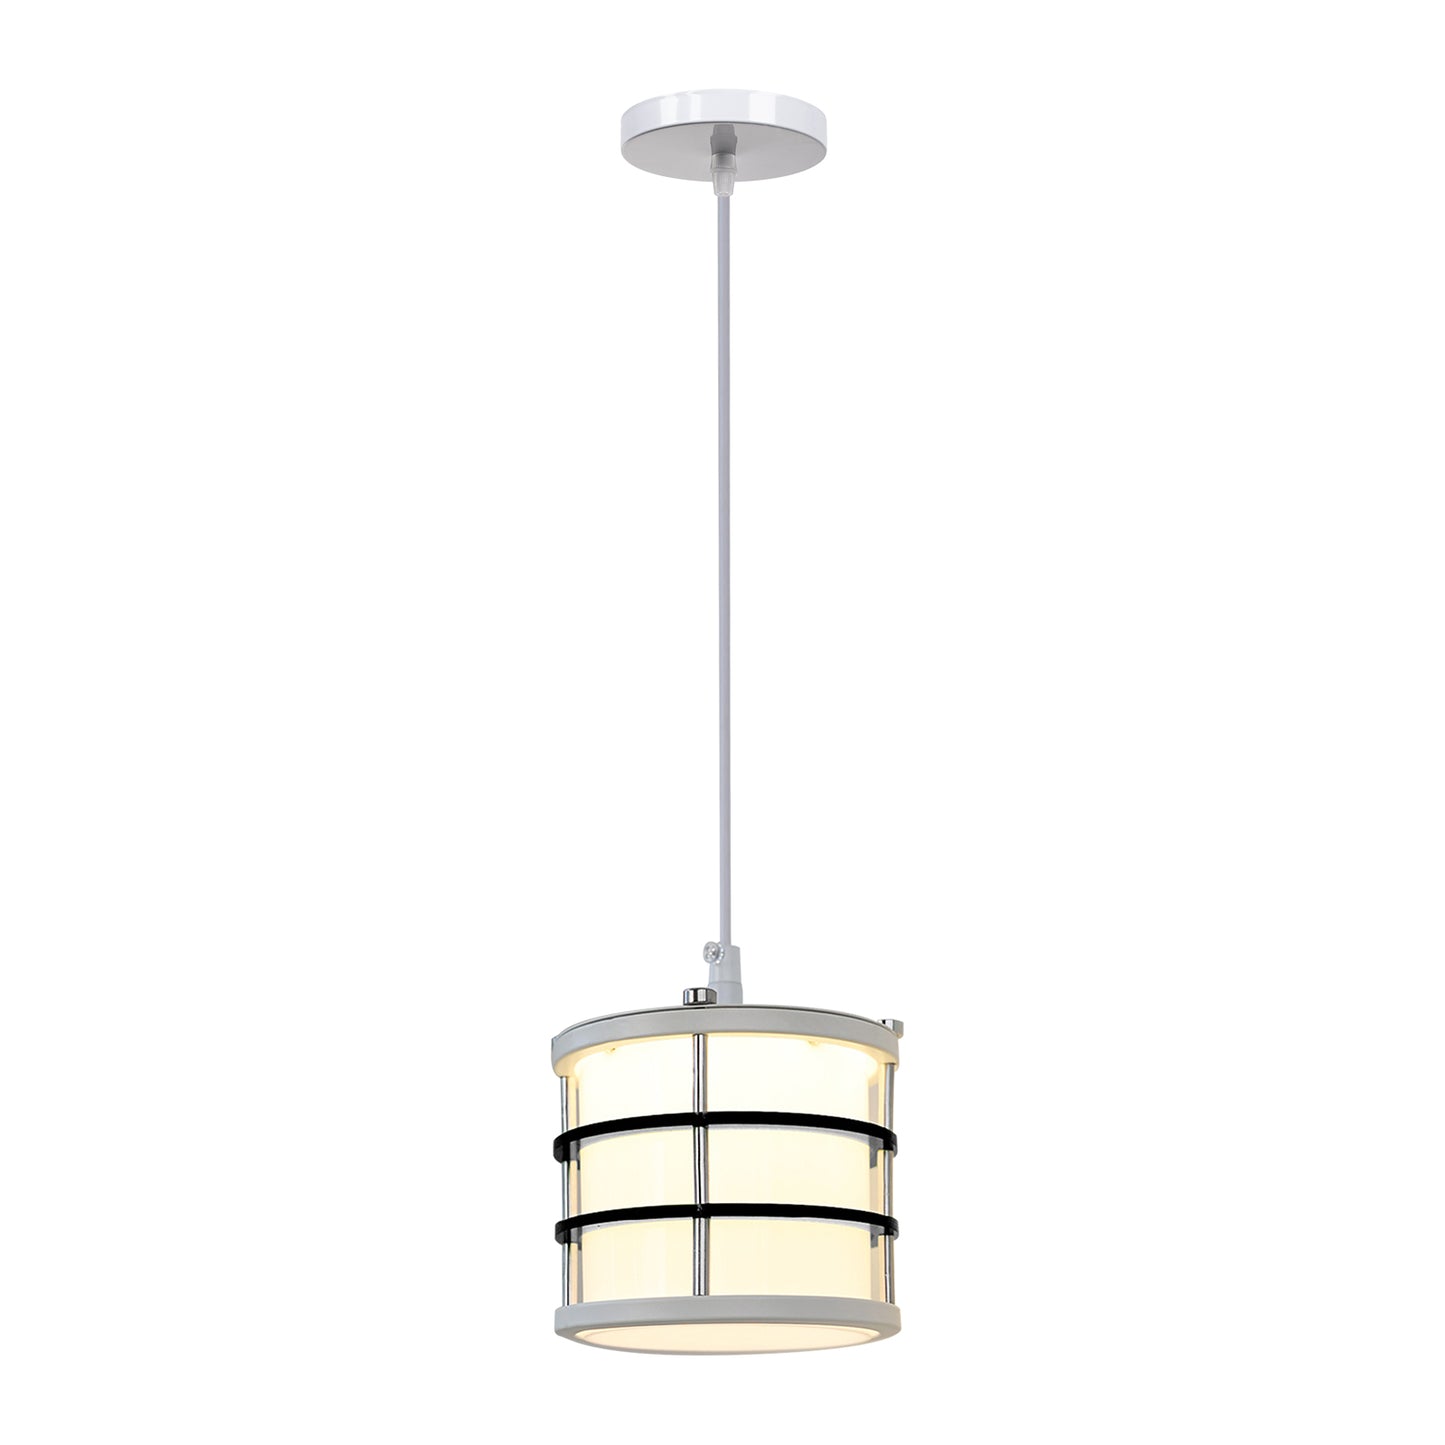 (N) ARTURESTHOME Nordic Modern Creative Dining Room Single Head Light Fixture Kitchen Small Chandelier